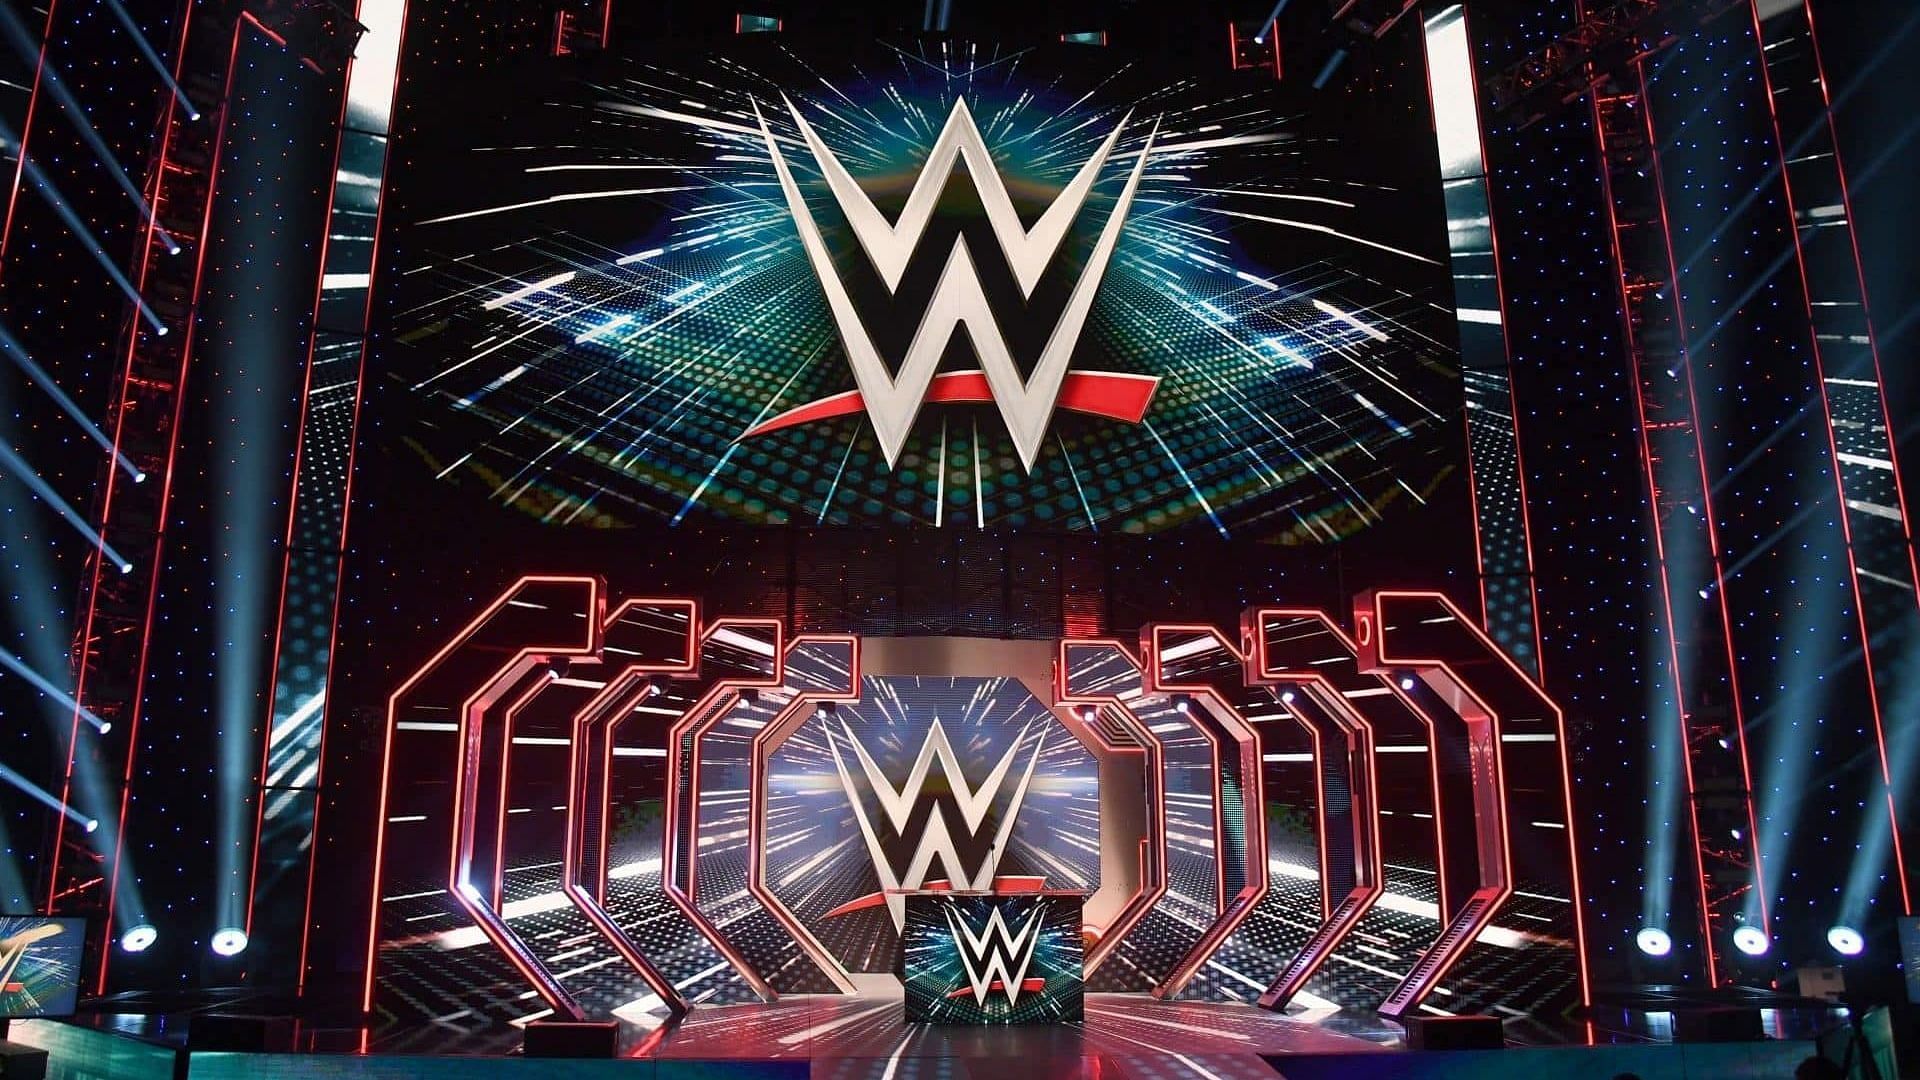 The WWE logos and set/stage on display inside arena